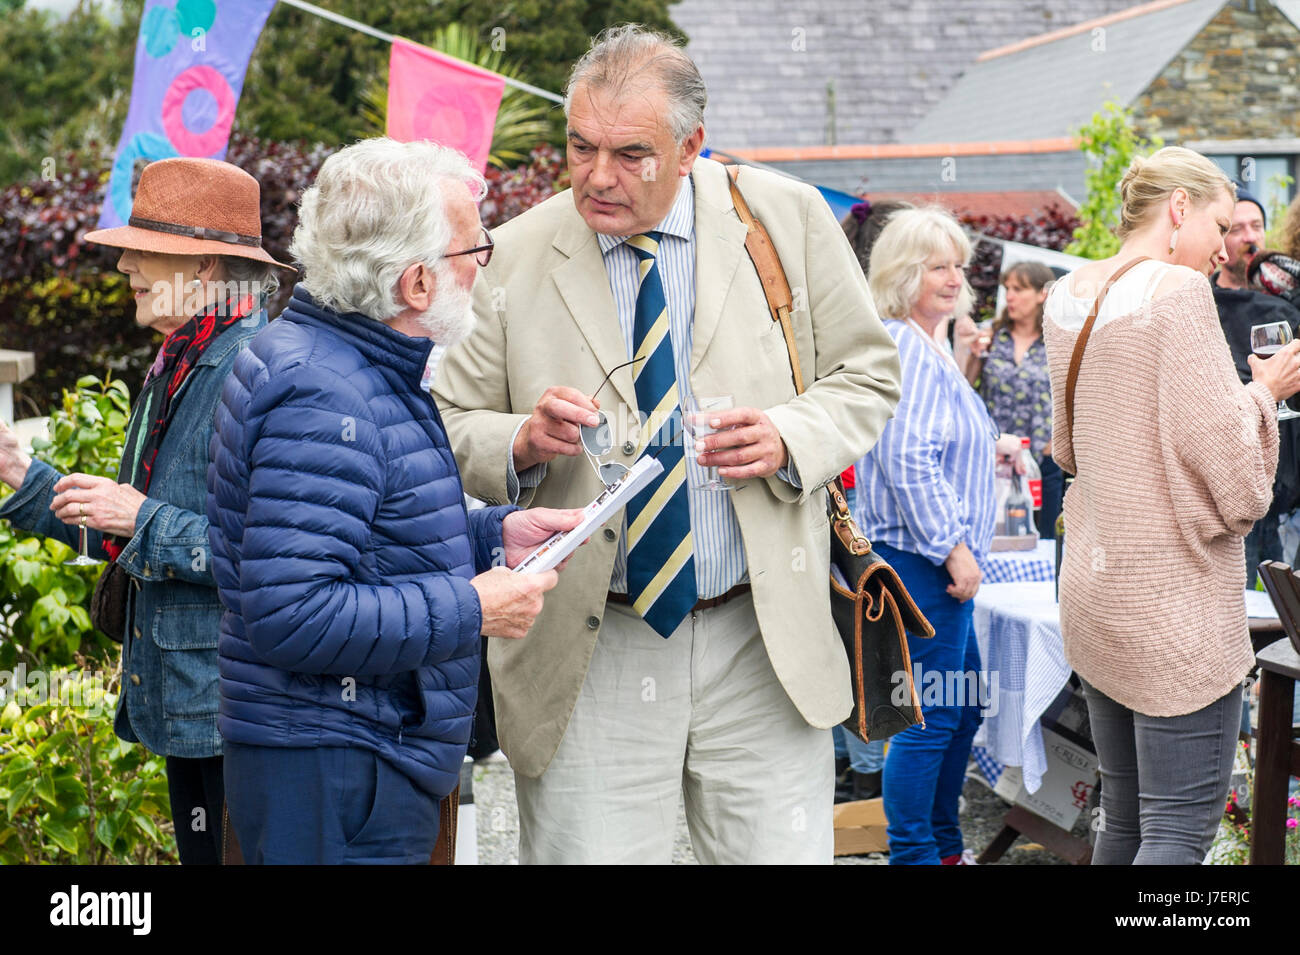 Schull, West Cork, Ireland. 24th May, 2017. Ian Bailey (in the cream suit), the man accused of the 1996 West Cork murder of French film producer, Sophie Toscan Du Plantier attended the Launch Party of the Fastnet Film Festival, which was held at Grove House, Schull, West Cork, Ireland. Credit: AG News/Alamy Live News Stock Photo